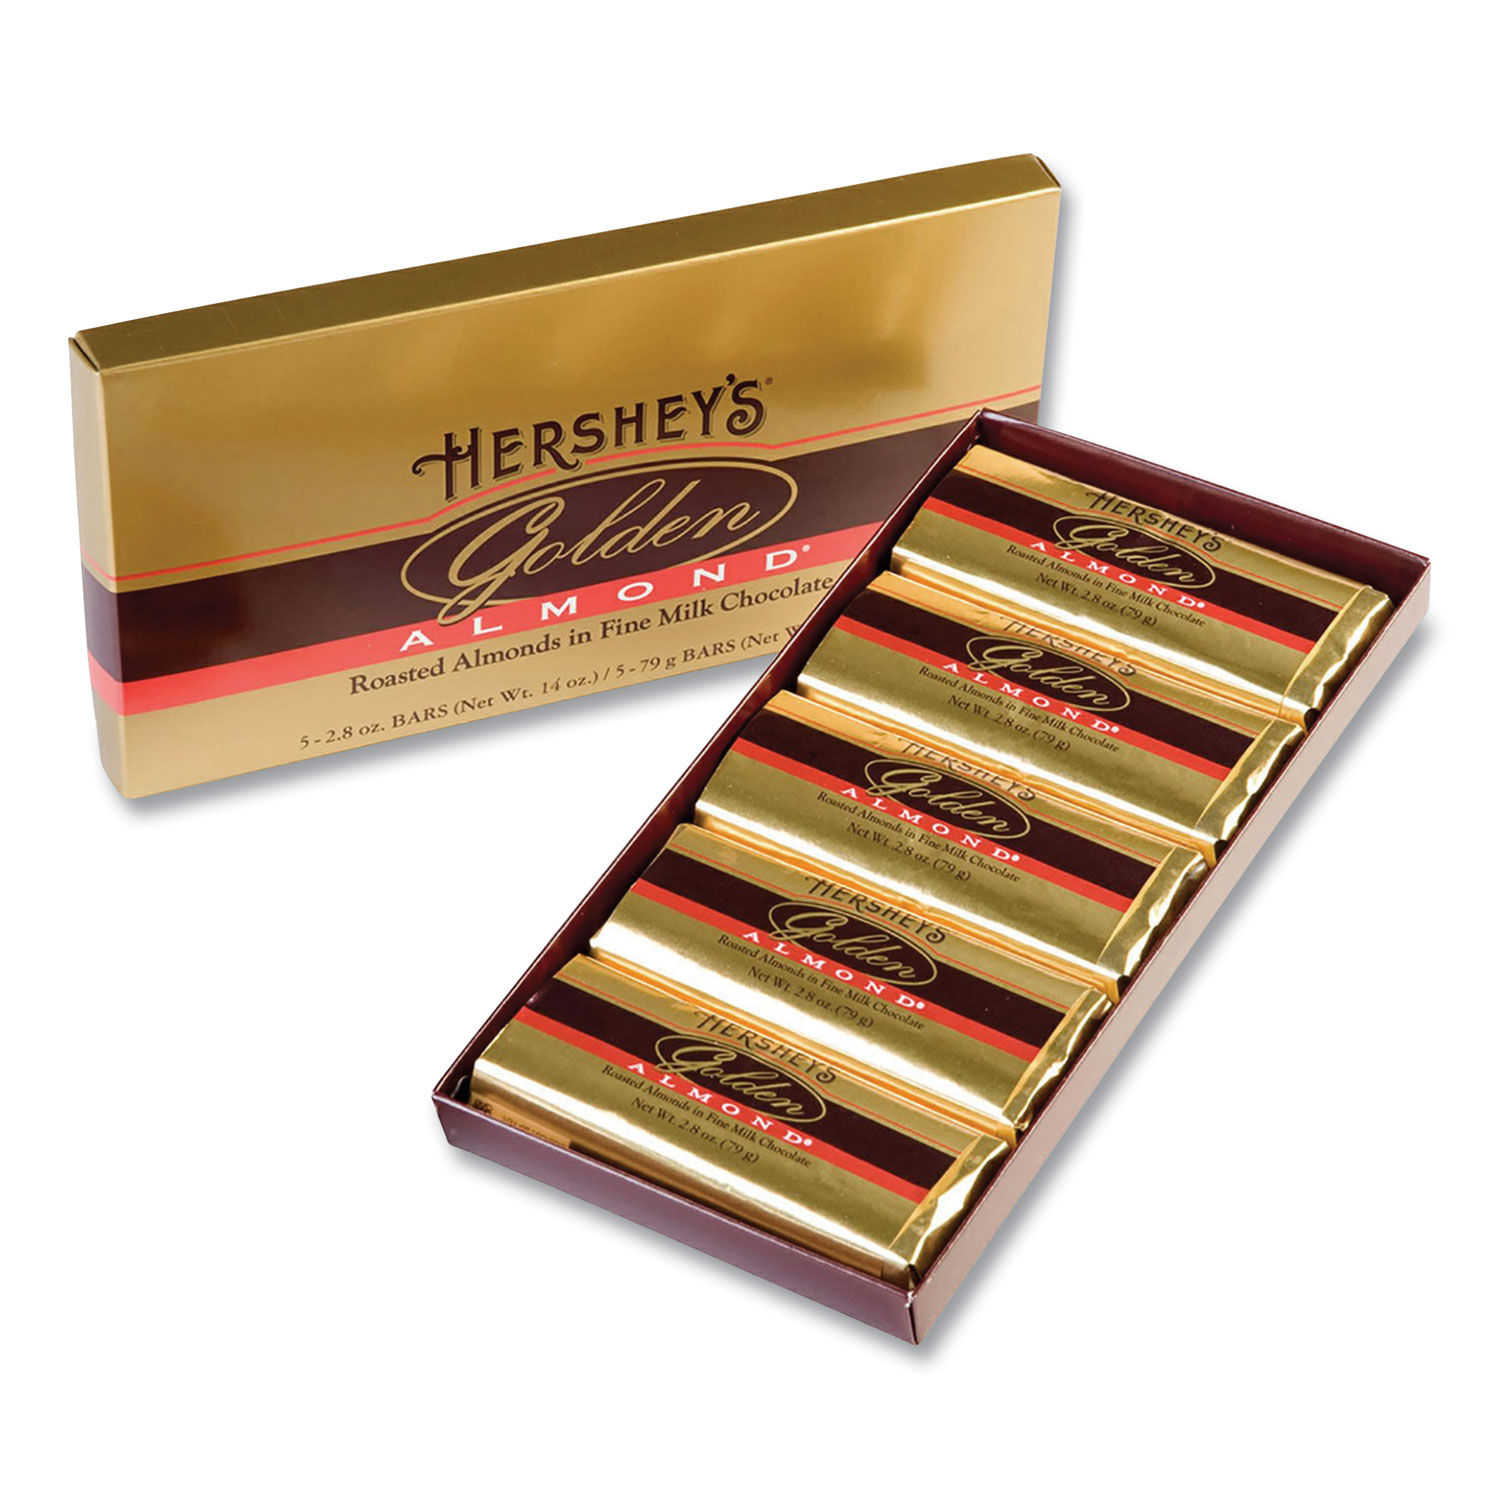  Hershey's 2103 GOLDEN ALMOND Chocolate Bar Gift Box, 2.8 oz Bar, 5 Bars/Box, Free Delivery in 1-4 Business Days (GRR24600060) 